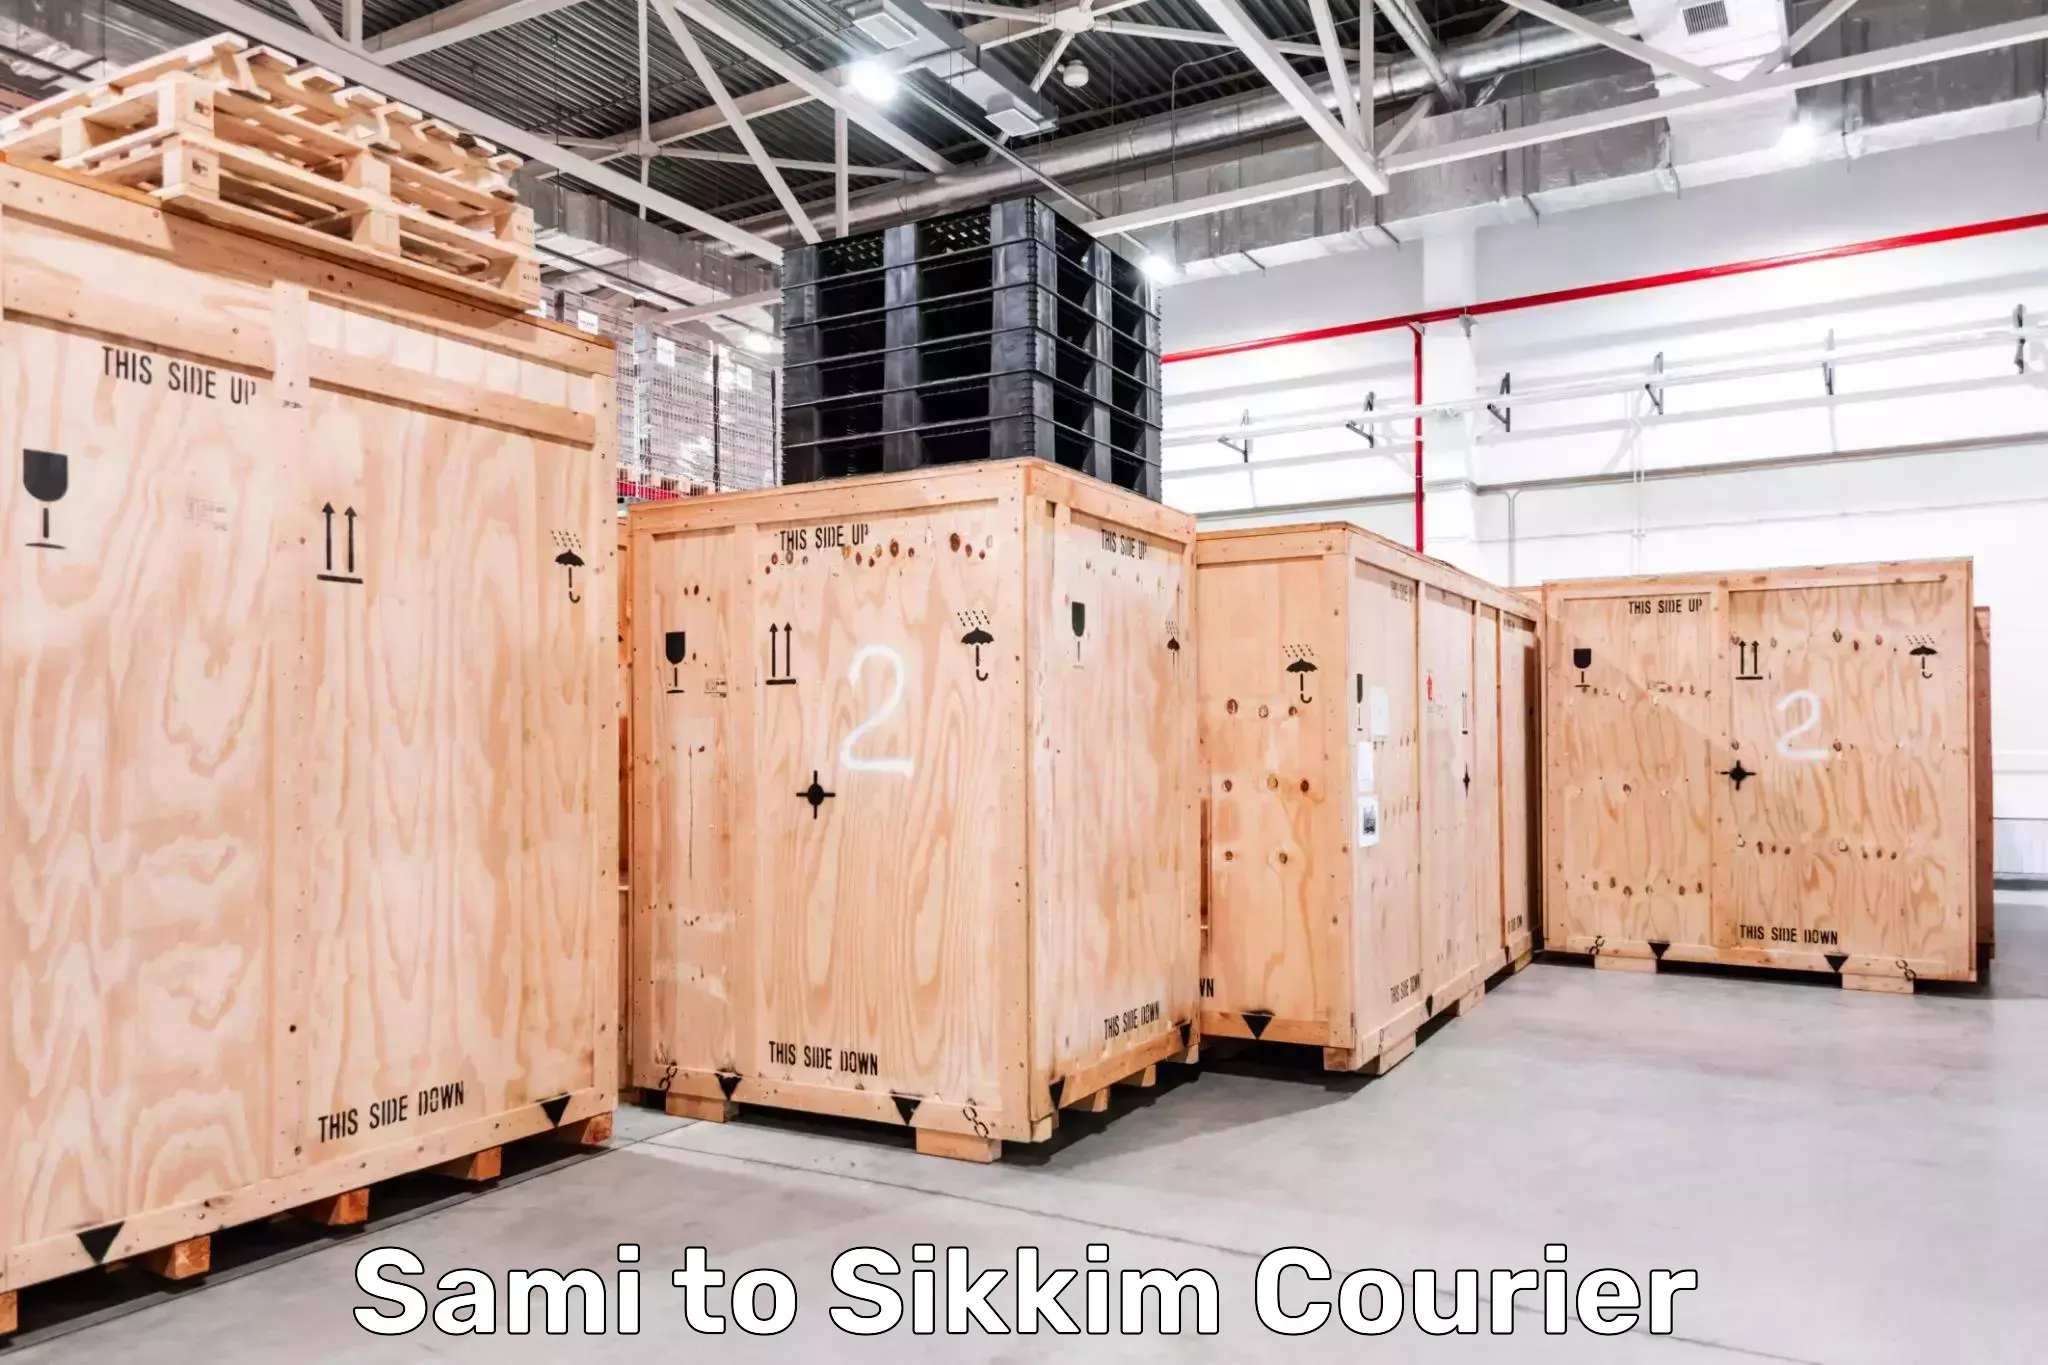 Global shipping networks Sami to Sikkim